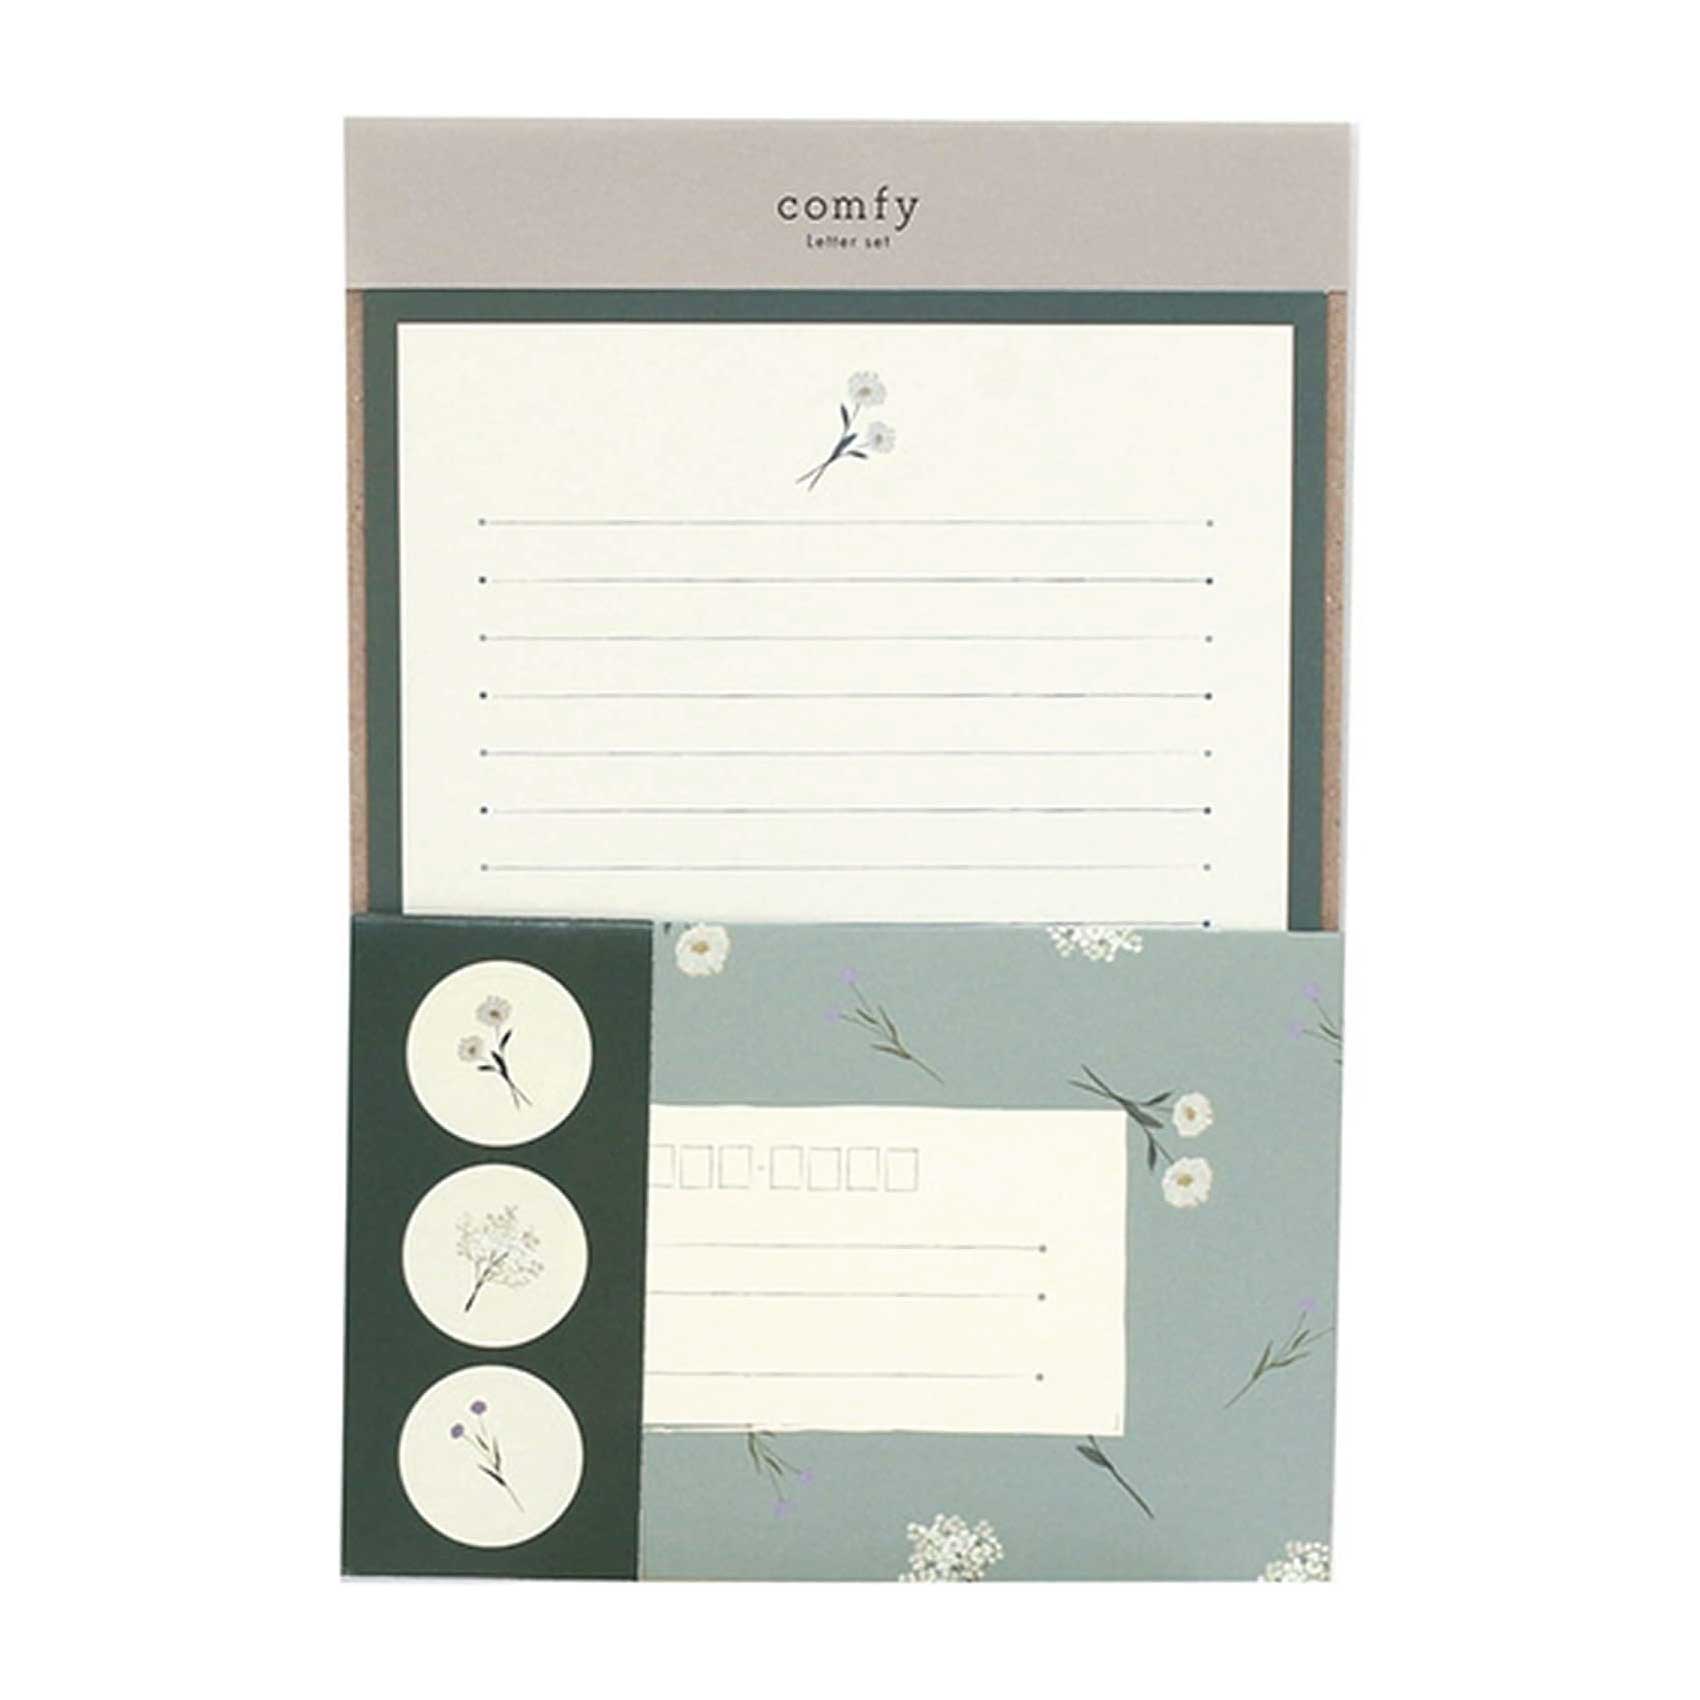 comfy teal flowers letter writing set with stickers japanese australia